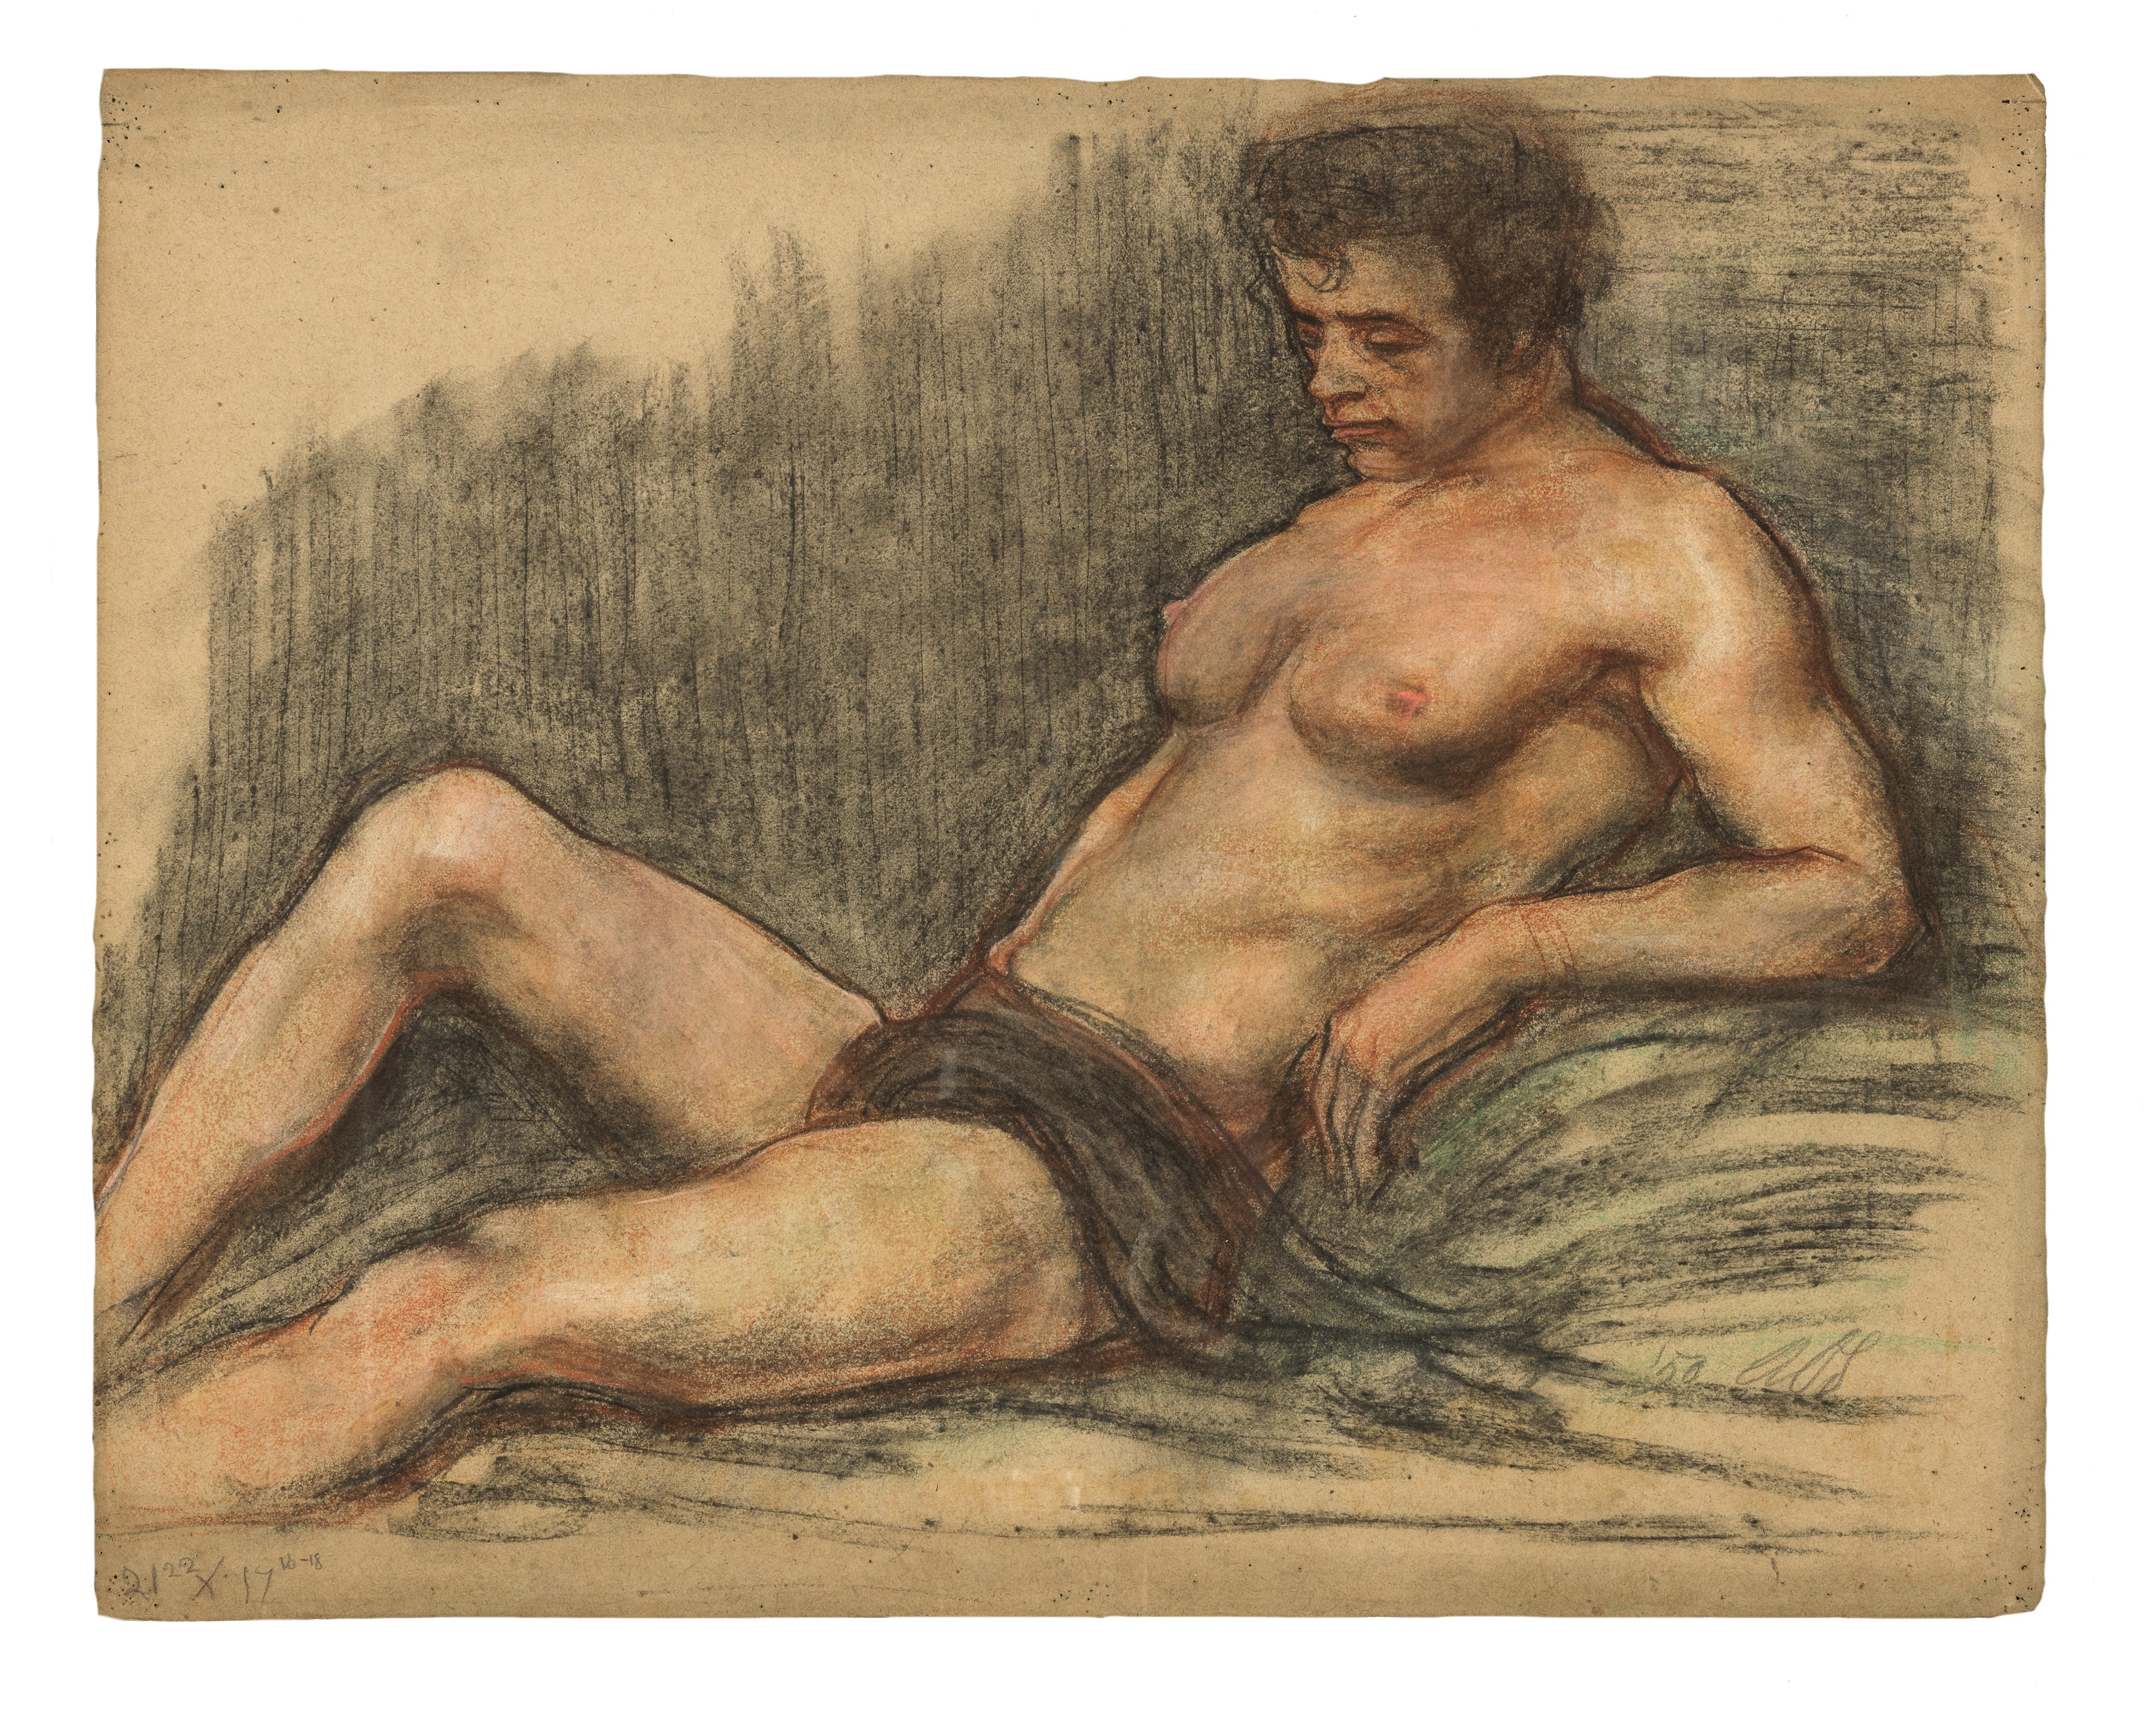 Babs, A Reclining Male Nude - Austin Osman Spare